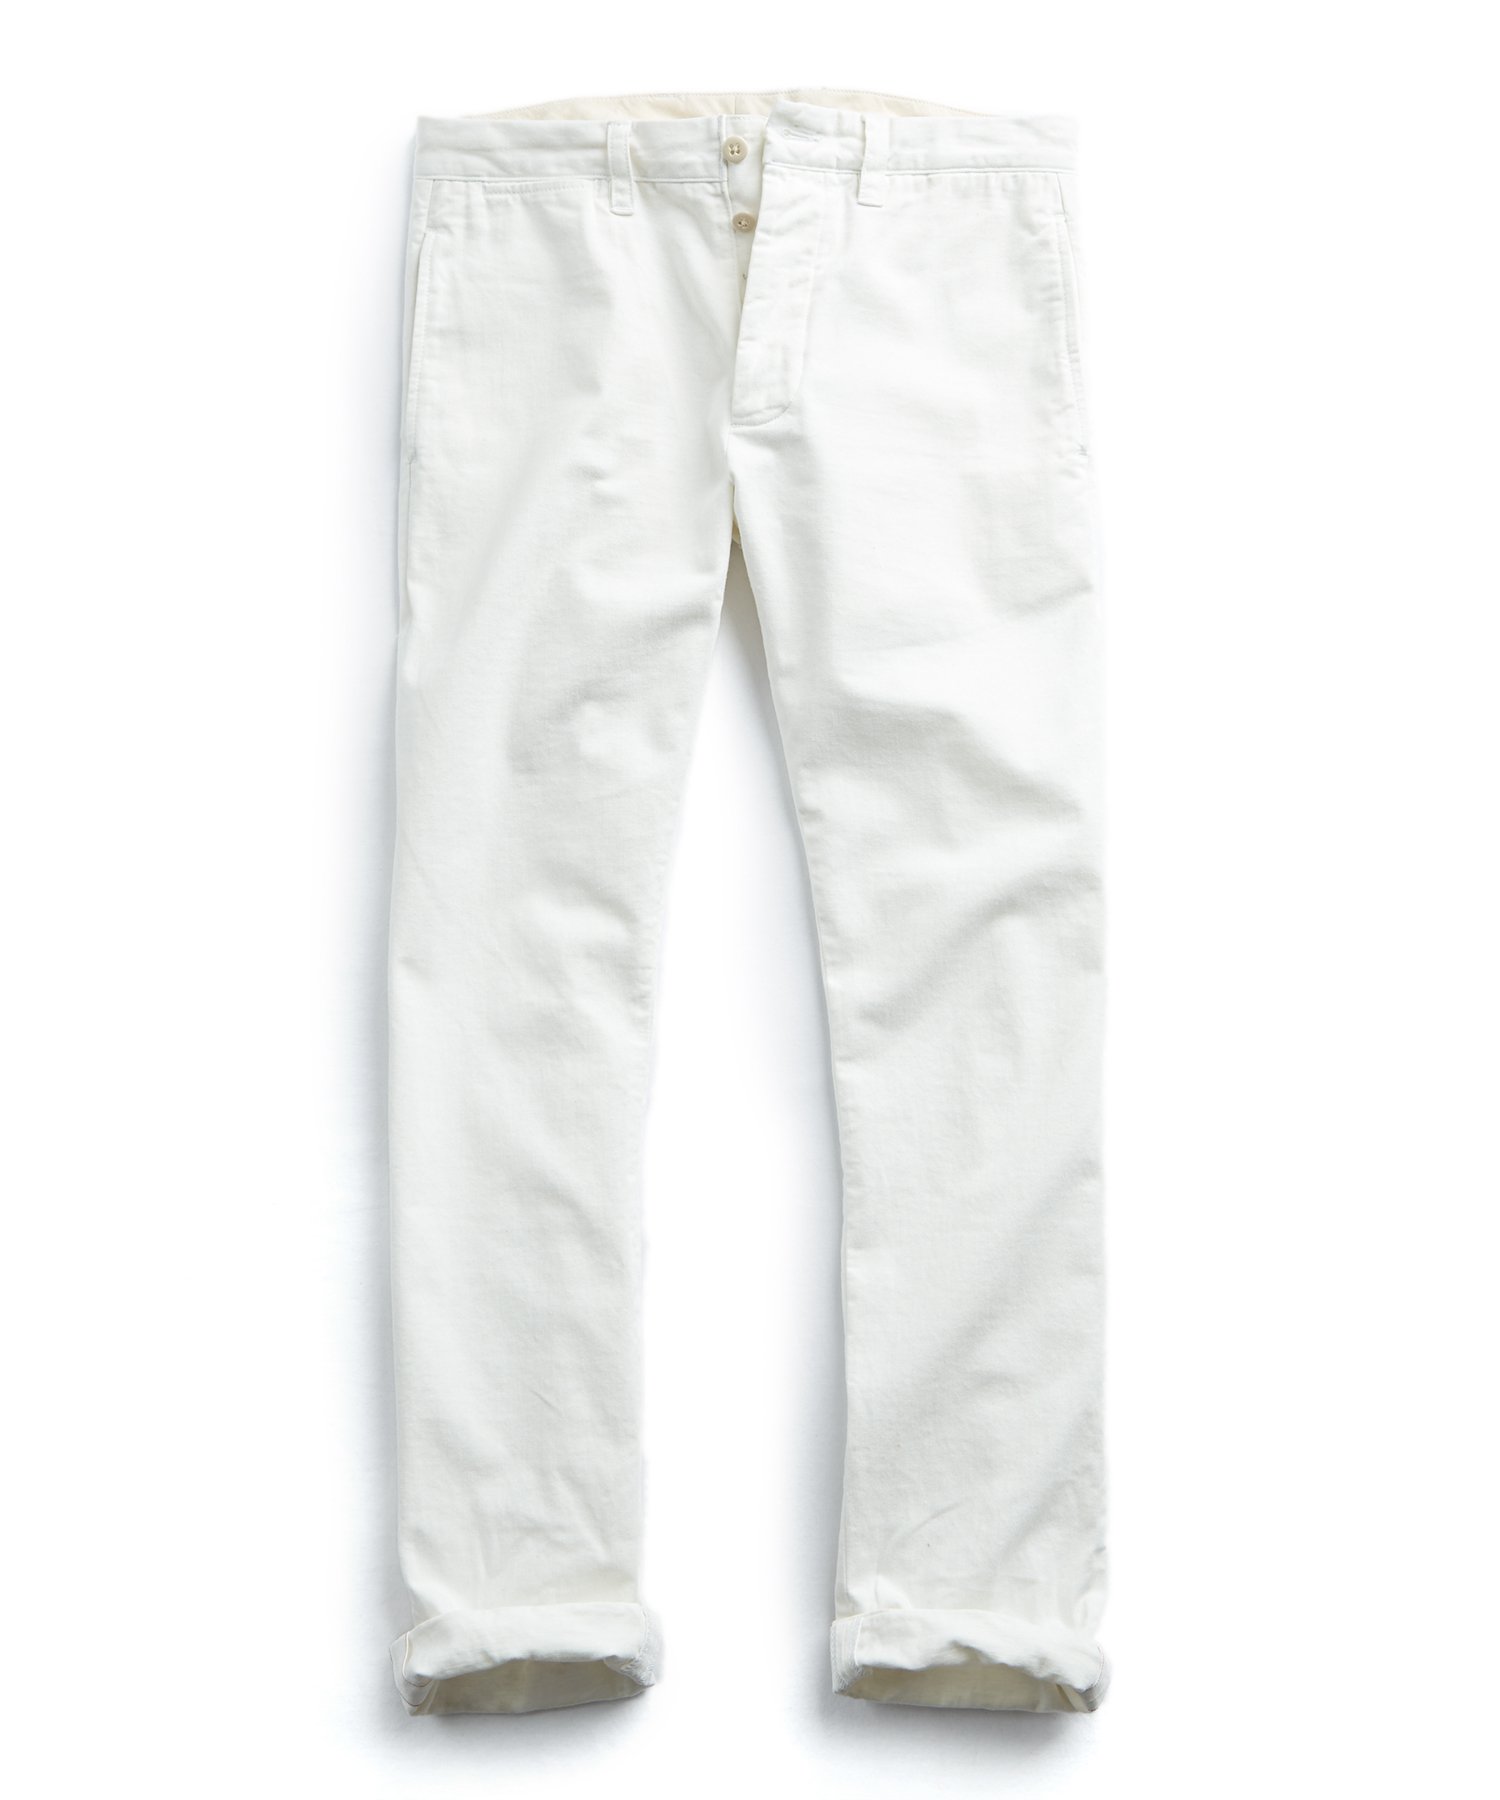 Todd Snyder Japanese Selvedge Chino Officer Pant in White | The Fashionisto